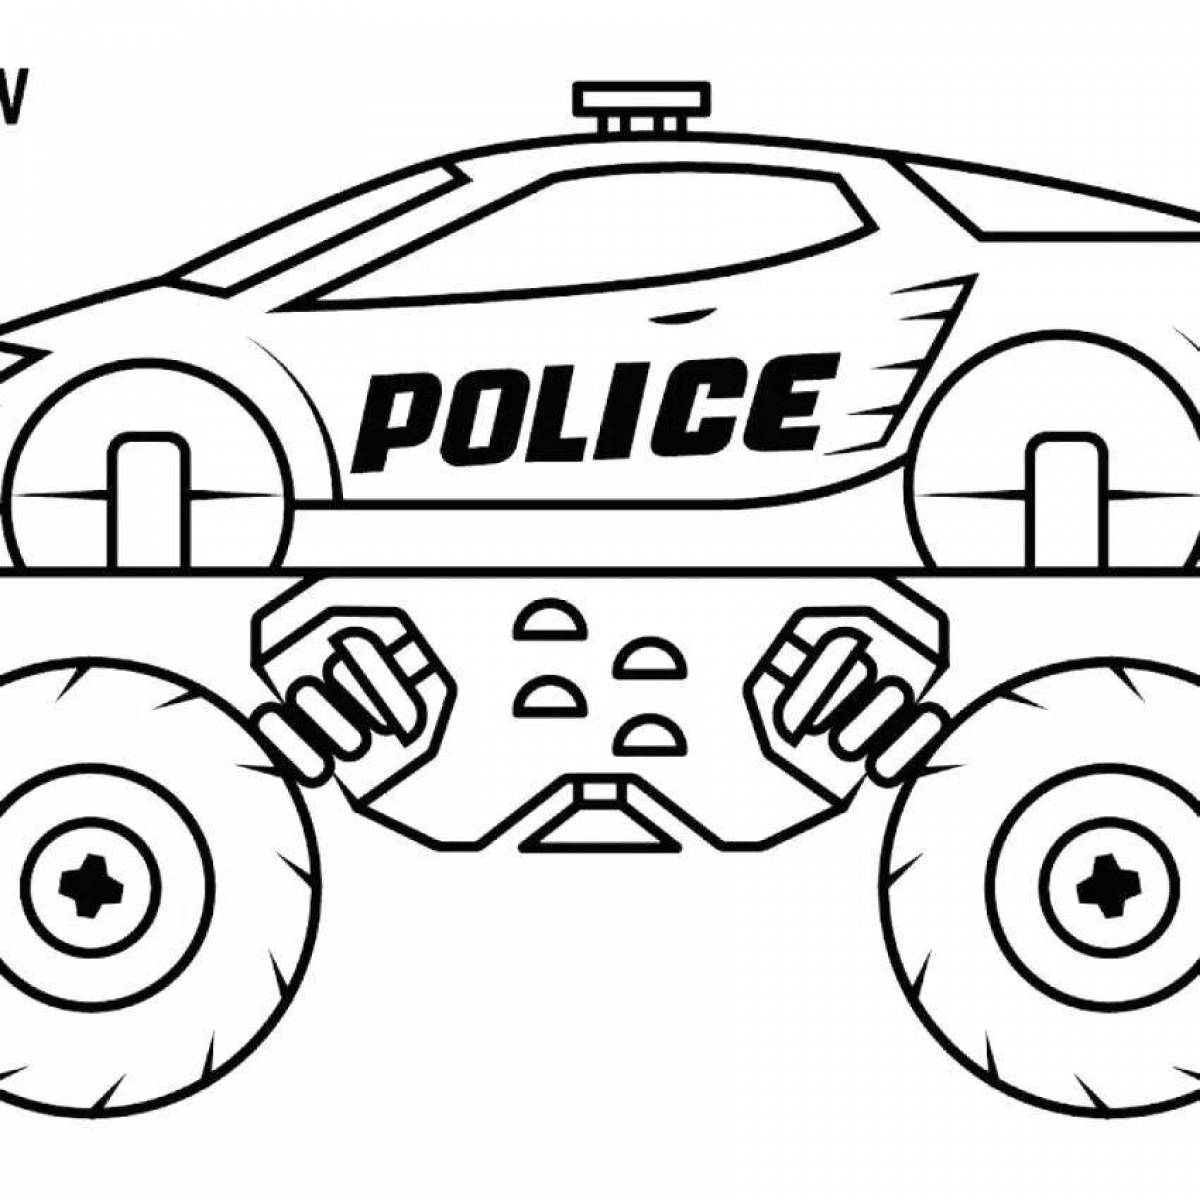 Coloring page incredible monster police car